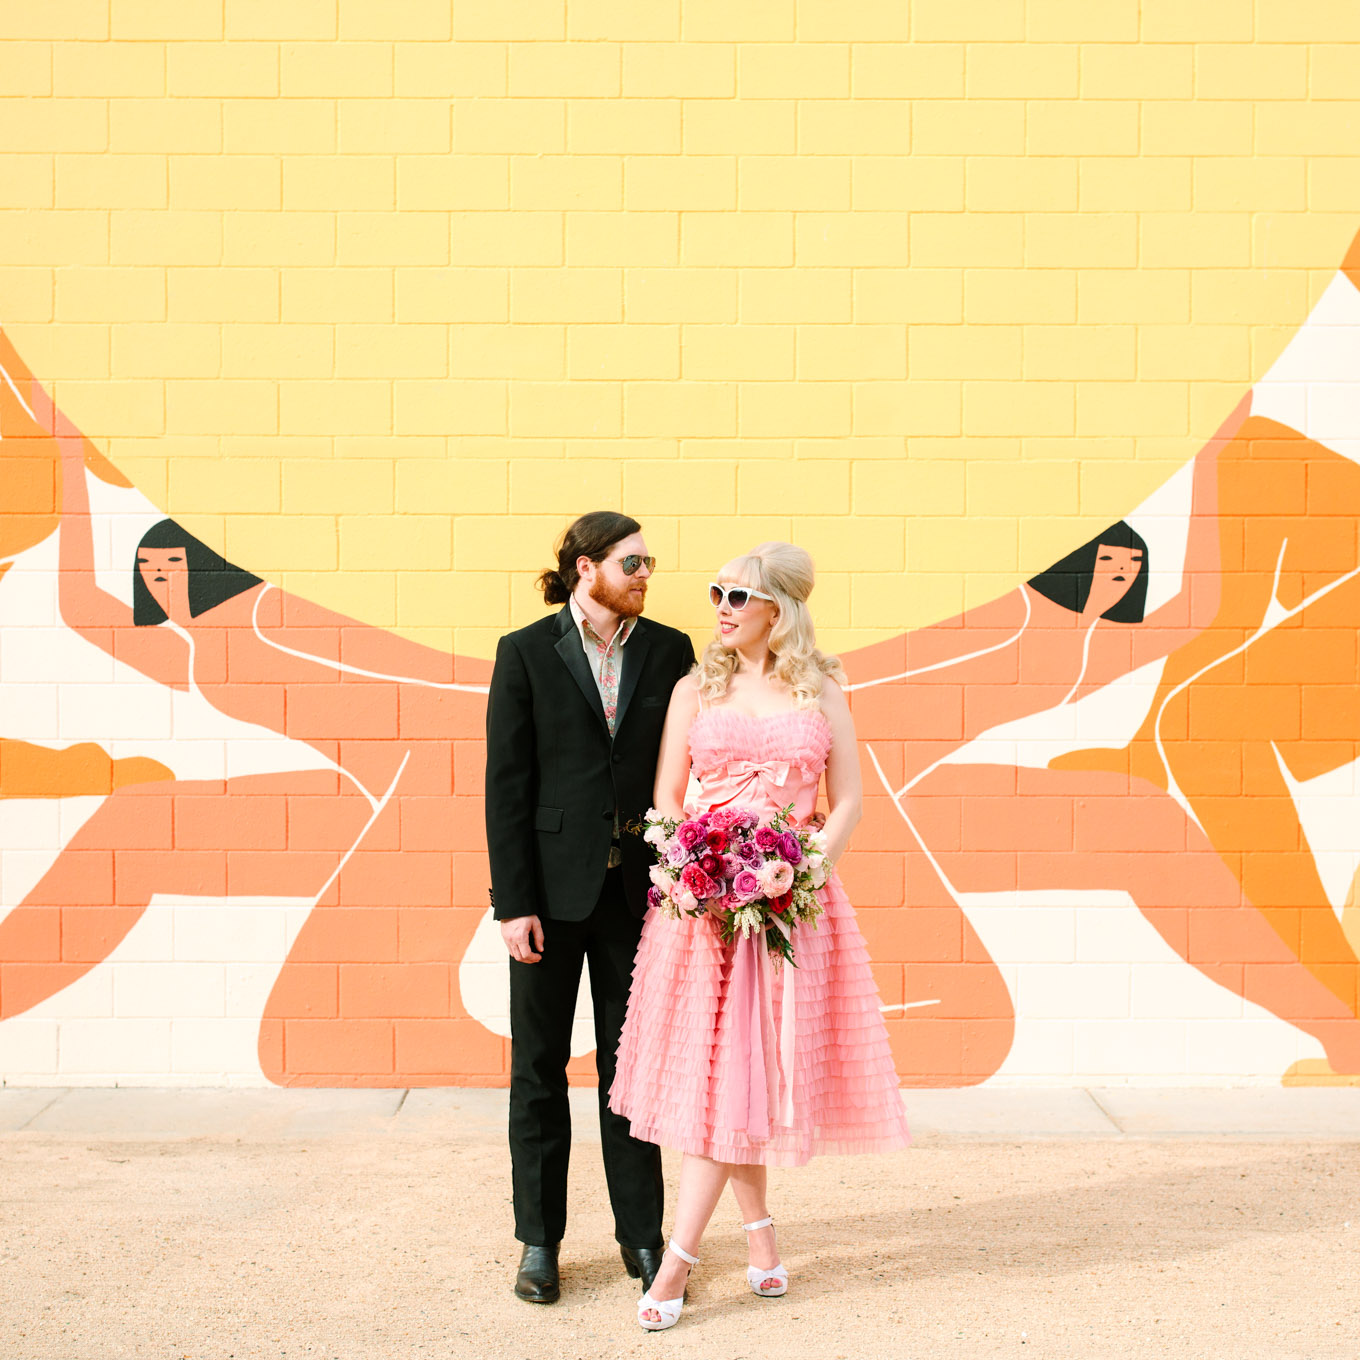 Colorful Ace Hotel portrait. Modern vintage-inspired Palm Springs engagement session with a 1960s pink Cadillac, retro clothing, and flowers by Shindig Chic. | Colorful and elevated wedding inspiration for fun-loving couples in Southern California | #engagementsession #PalmSpringsengagement #vintageweddingdress #floralcar #pinkcar   Source: Mary Costa Photography | Los Angeles